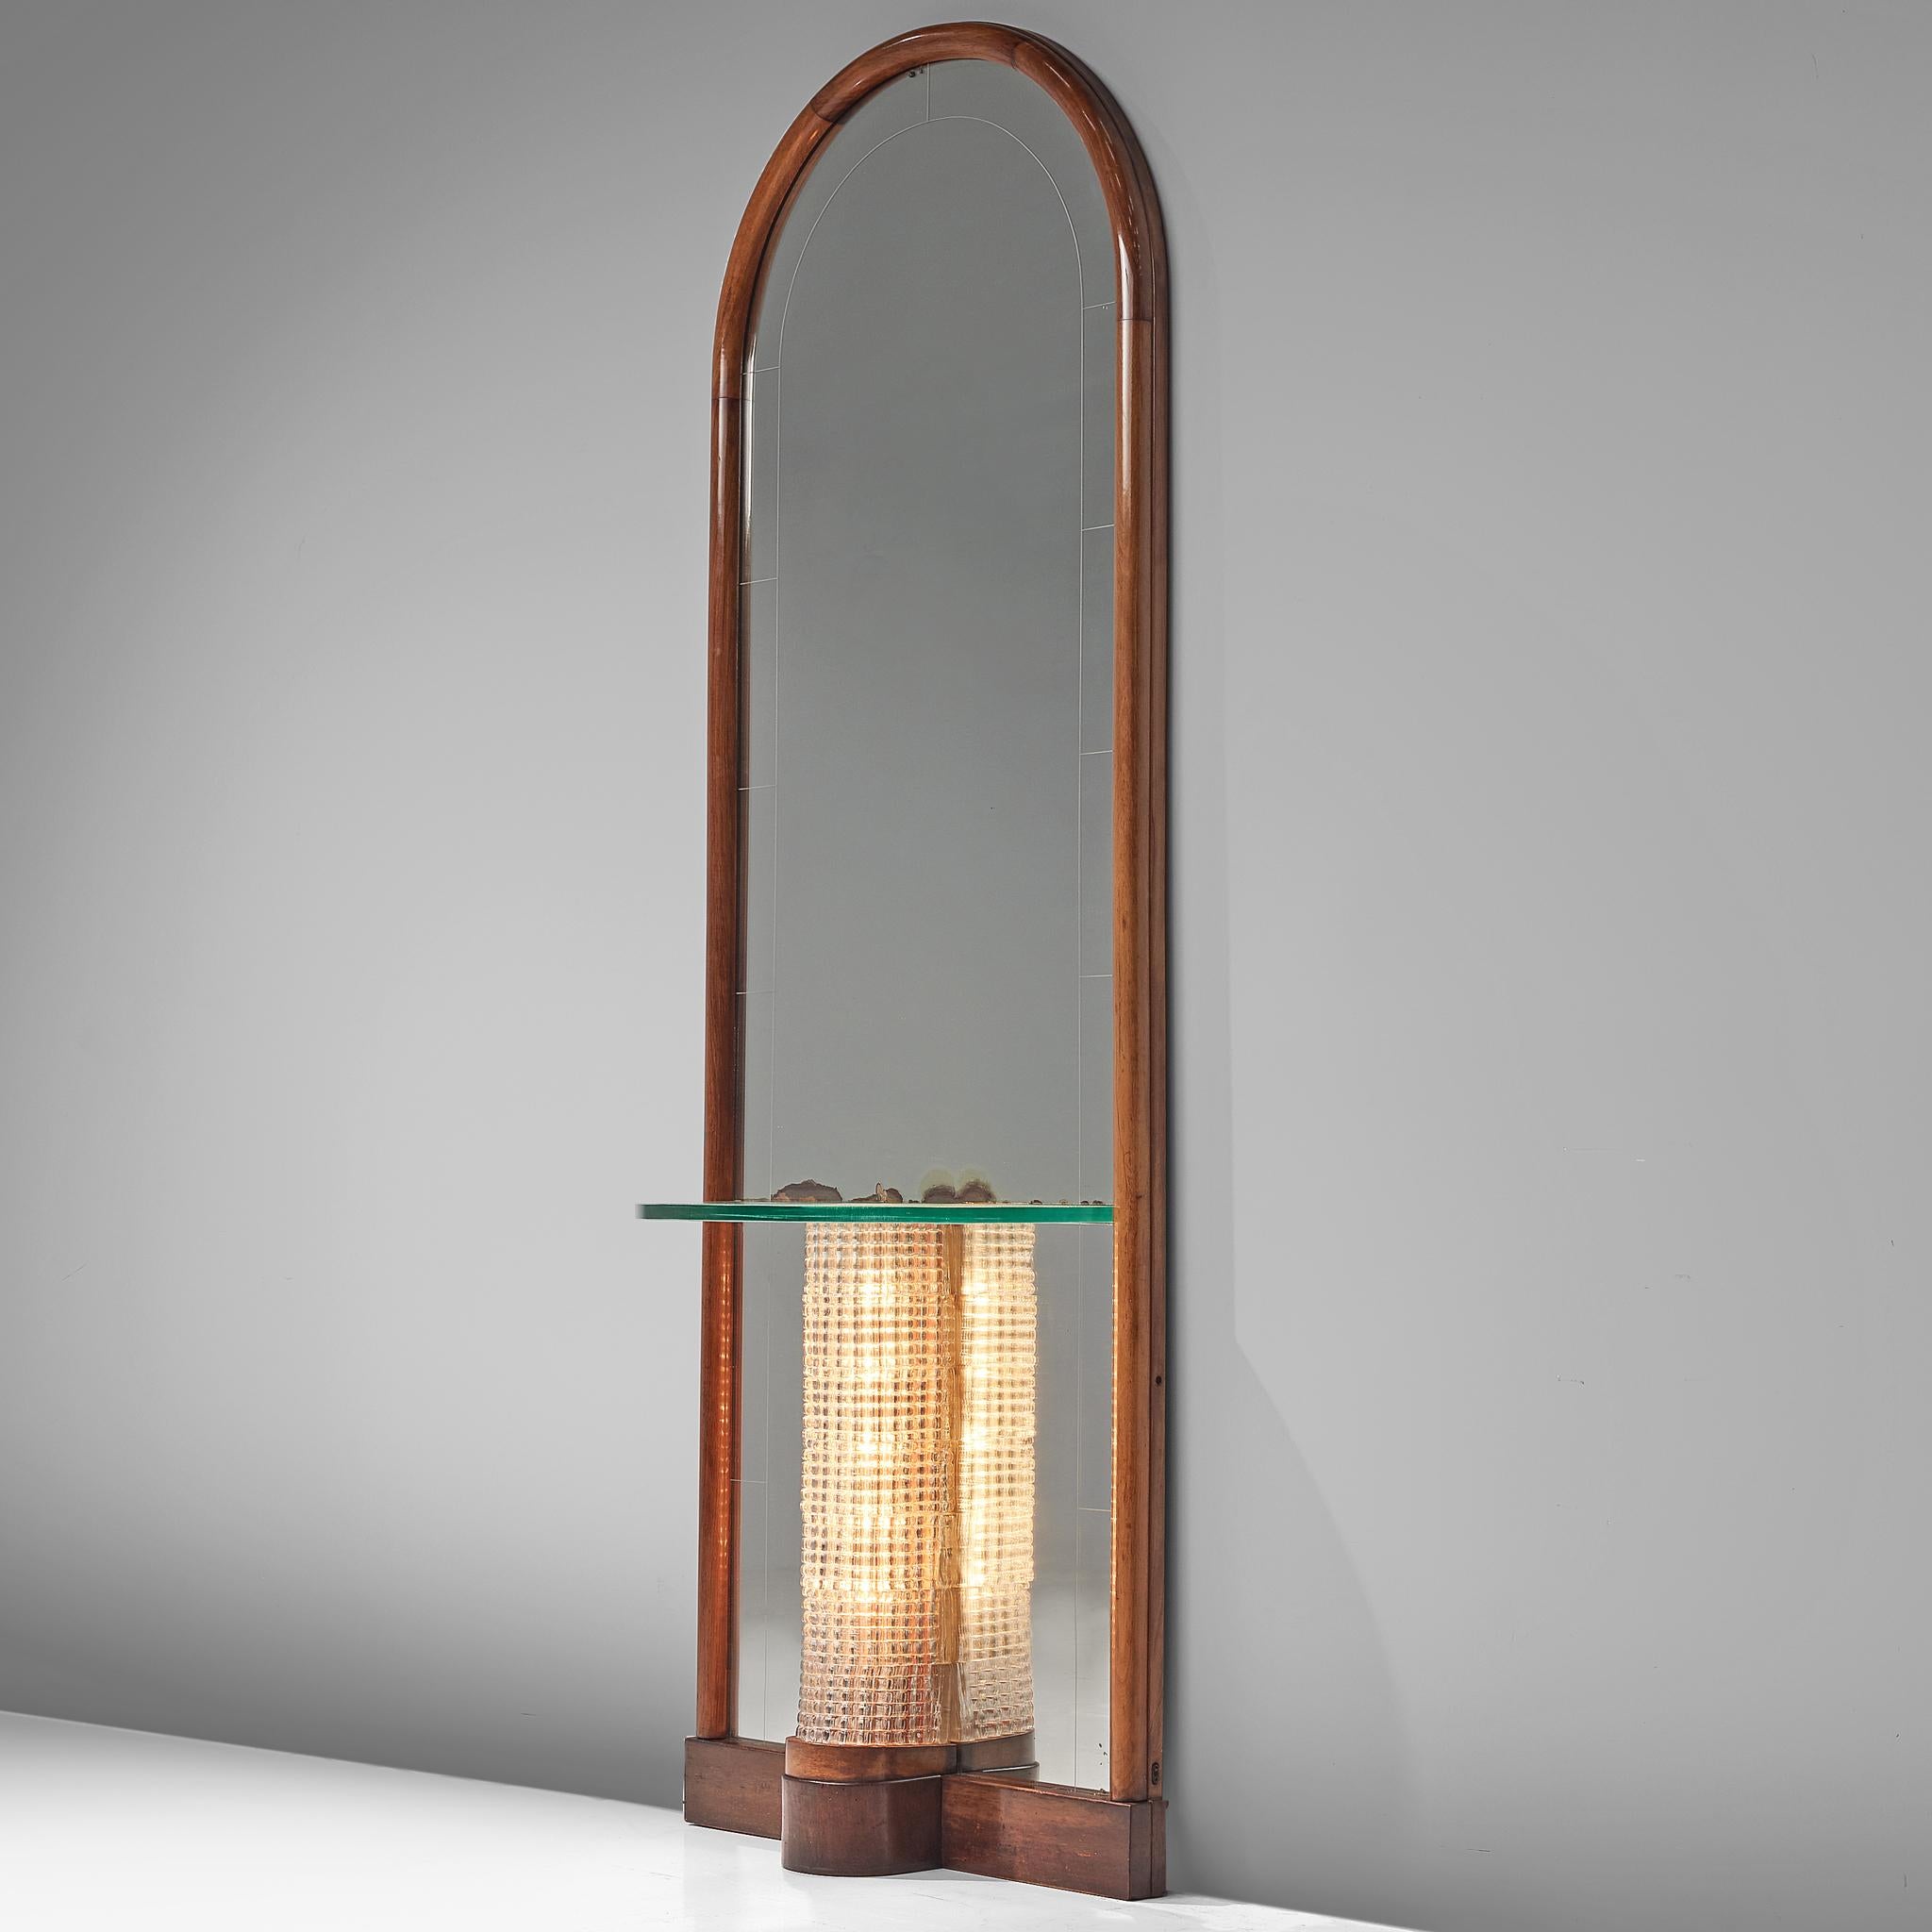 Mirror console, glass and walnut, Italy, circa 1940

Elegant mirror with a rounded top and a walnut frame. Attached in the middle is a small glass console that rests on a glass structured pedestal. A light source is placed with the pedestal,